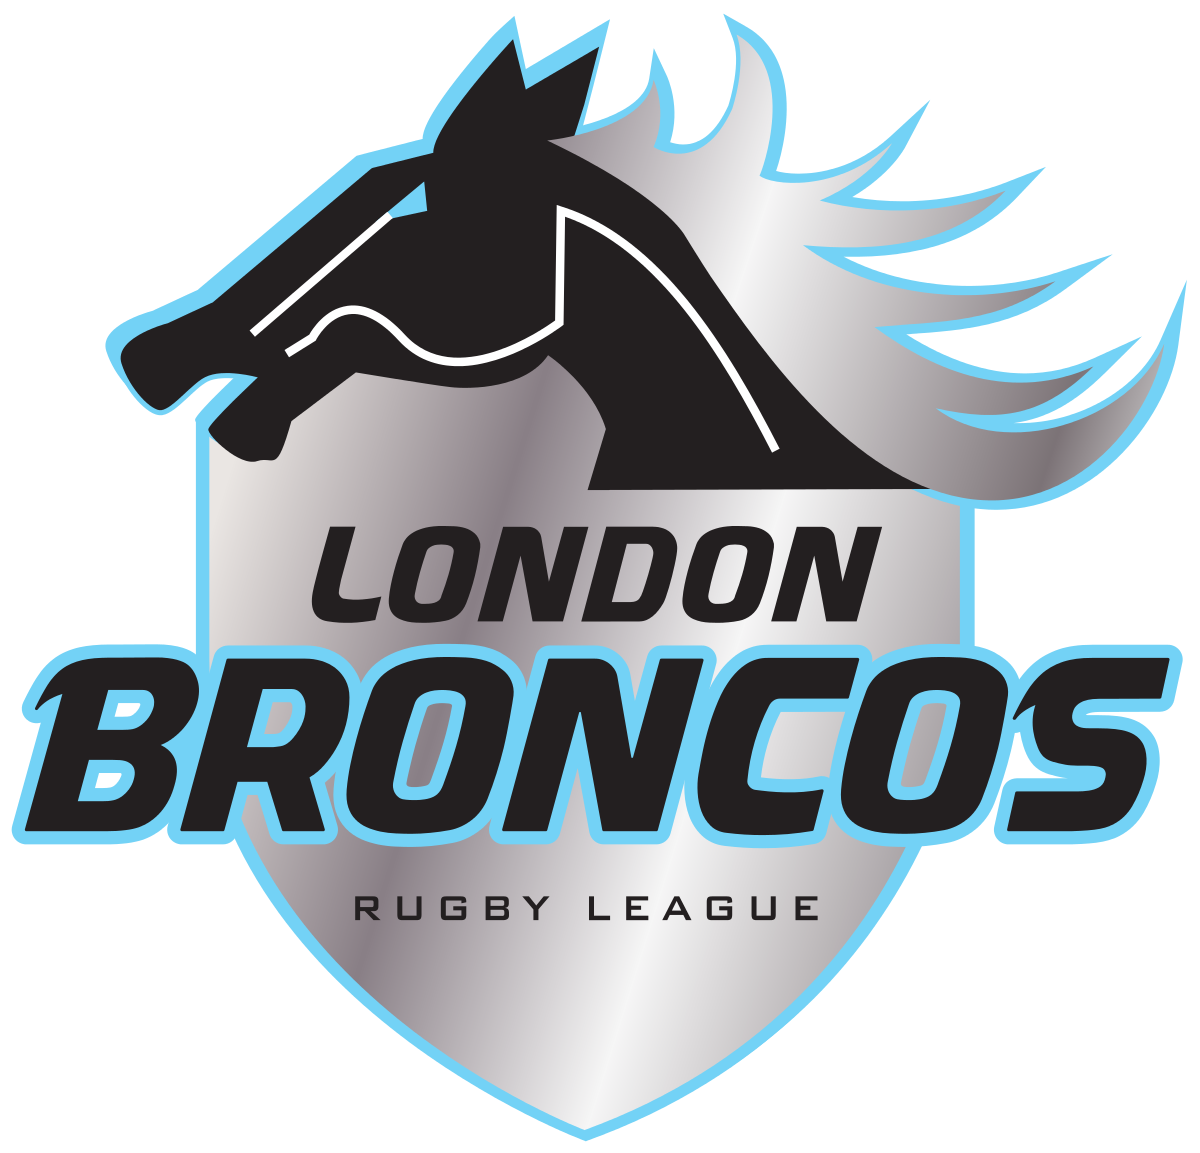 Ticket Information : London Broncos (A) - Widnes Vikings